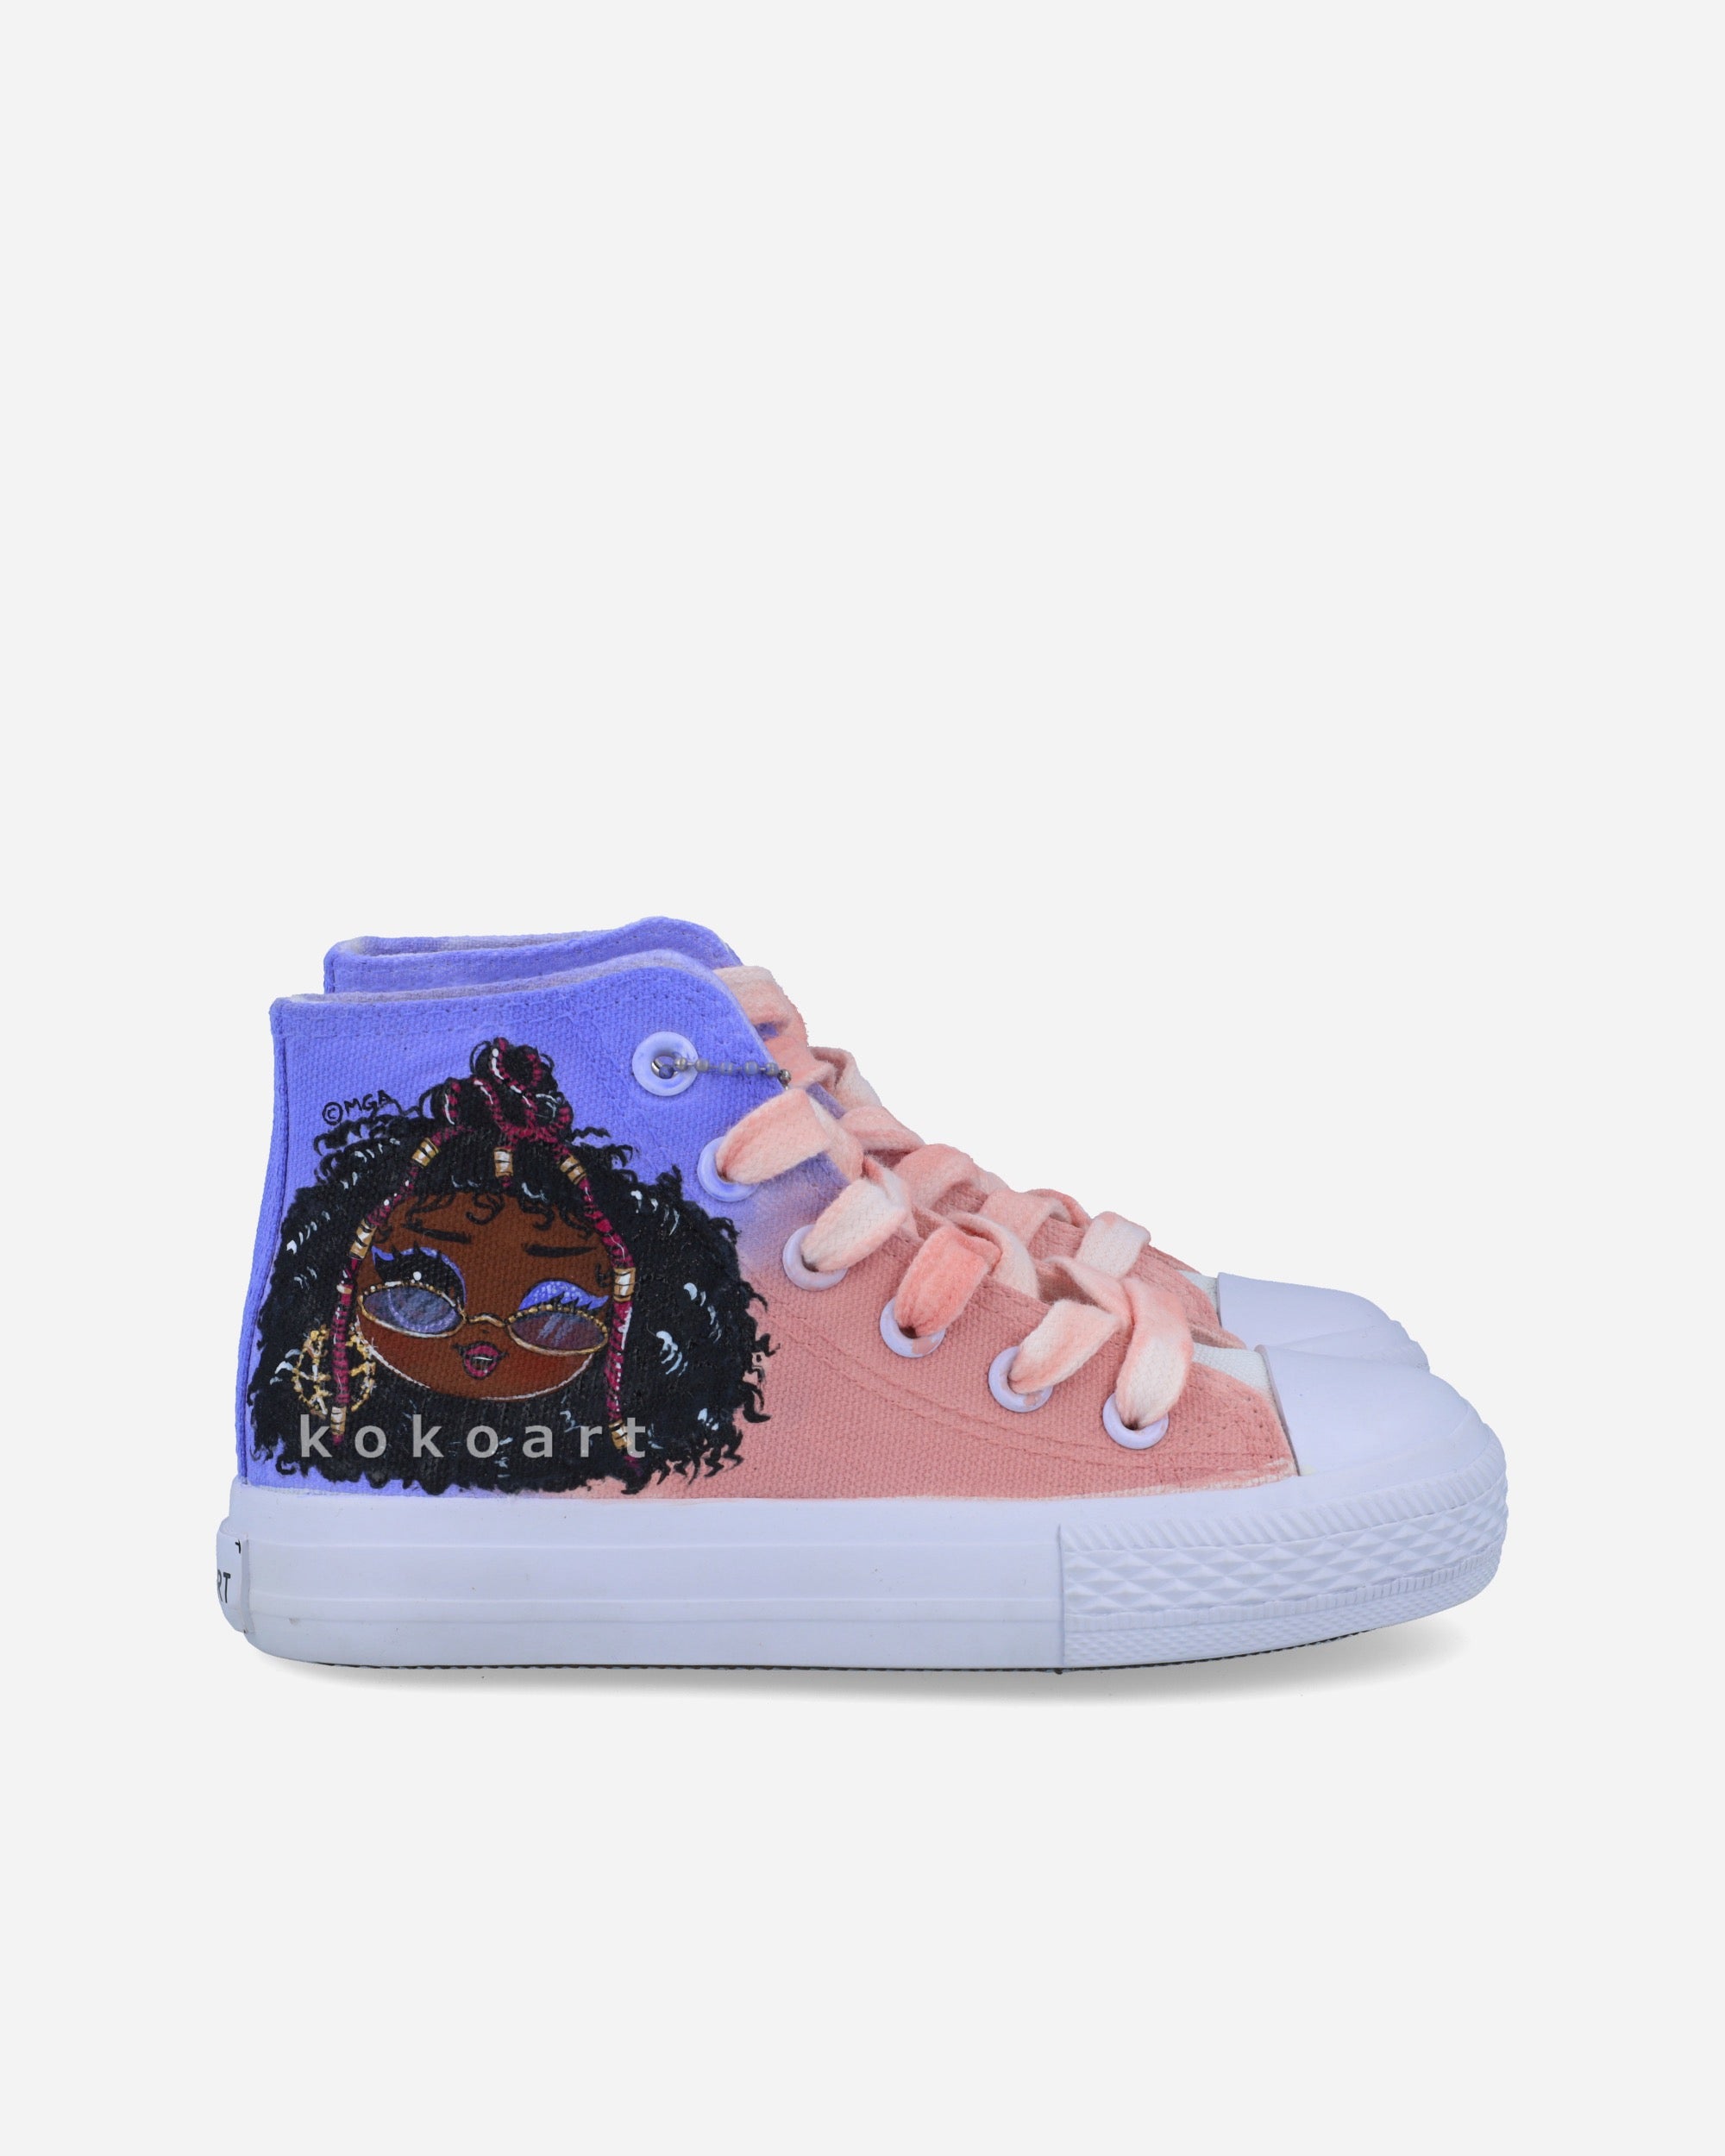 L.O.L. SURPRISE! Hoops Cute Hand Painted Shoes